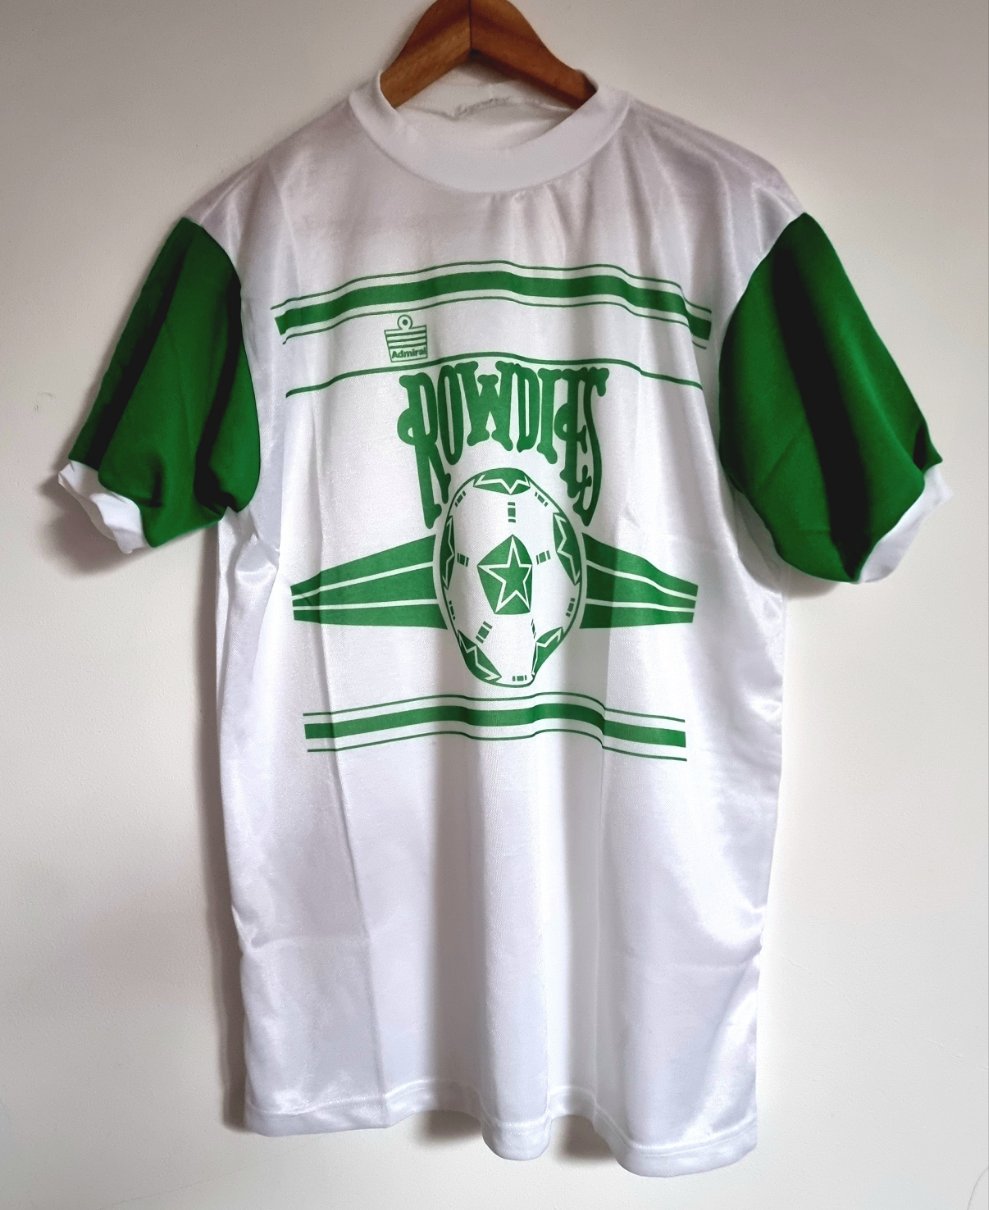 Admiral Tampa Bay Rowdies 80s Leisure T- Shirt Large